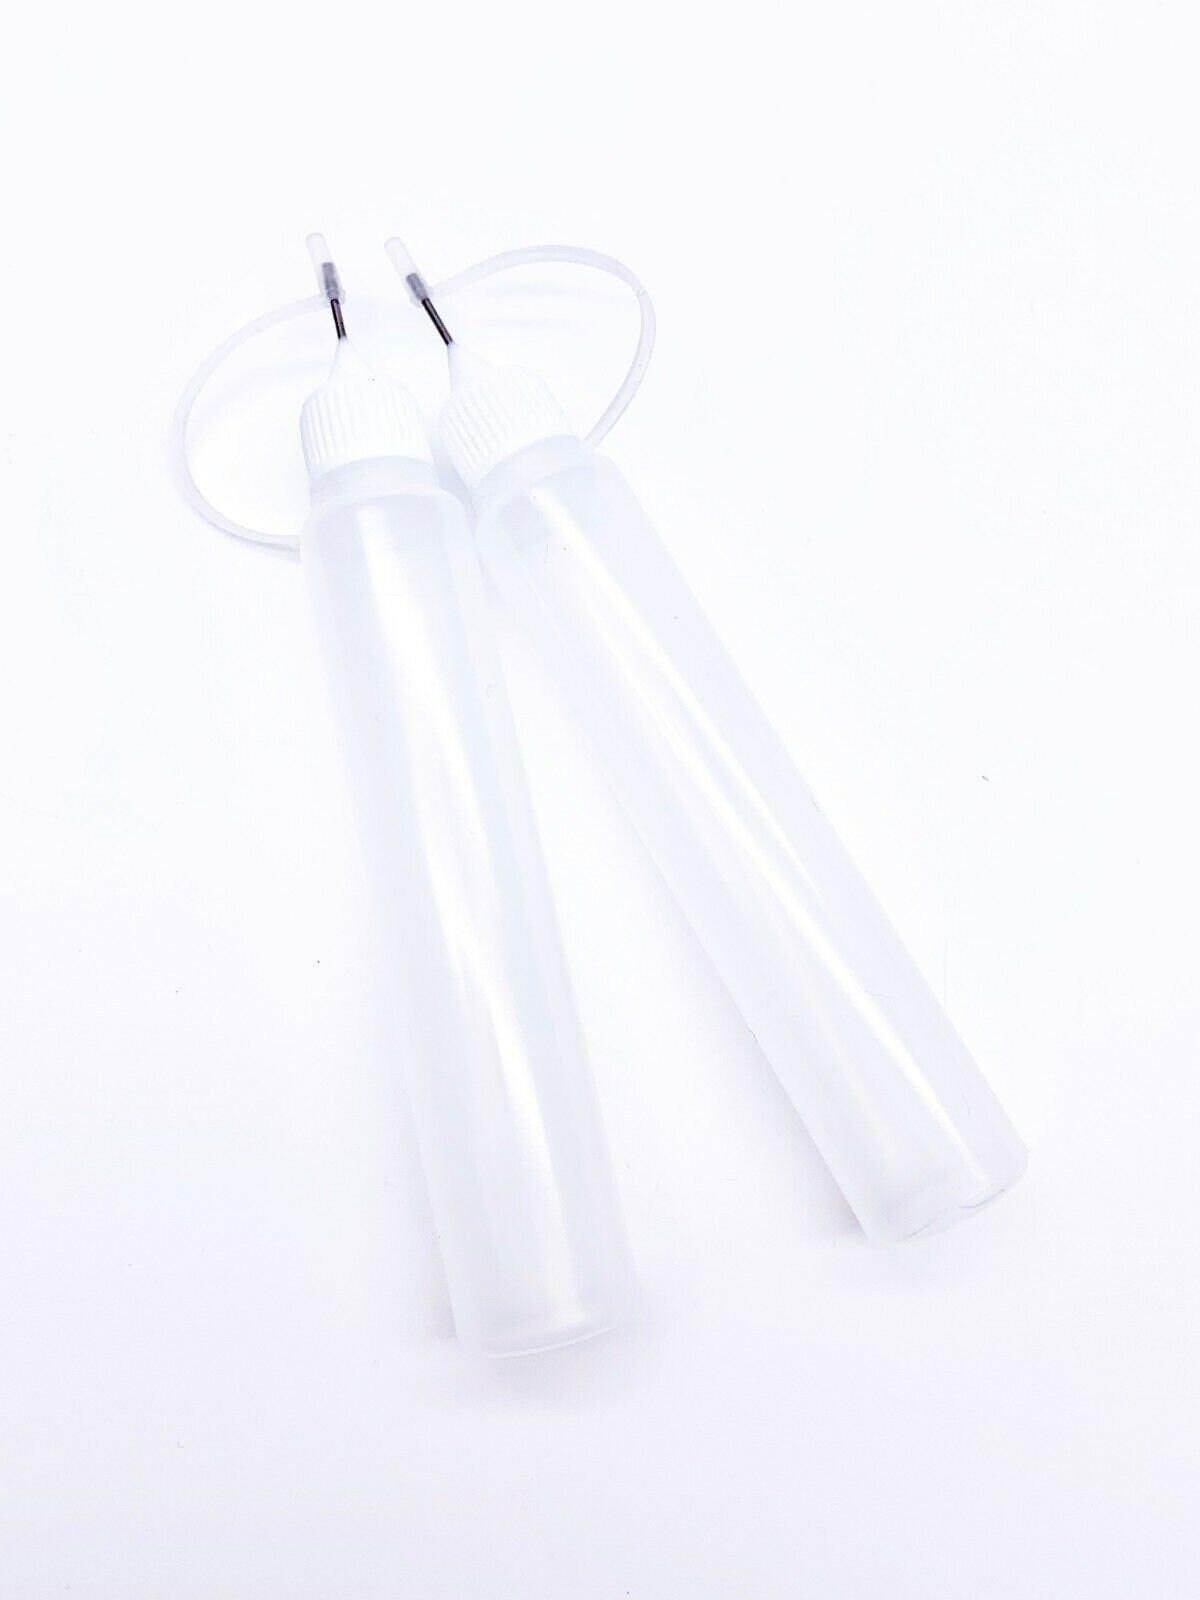 30ml Gem-tac Glue for Rhinestone Crystal Applying Needle Precision Tip  Bottle Clothing Crafts Projects DIY With 1 Wax Picker Pencil Free 